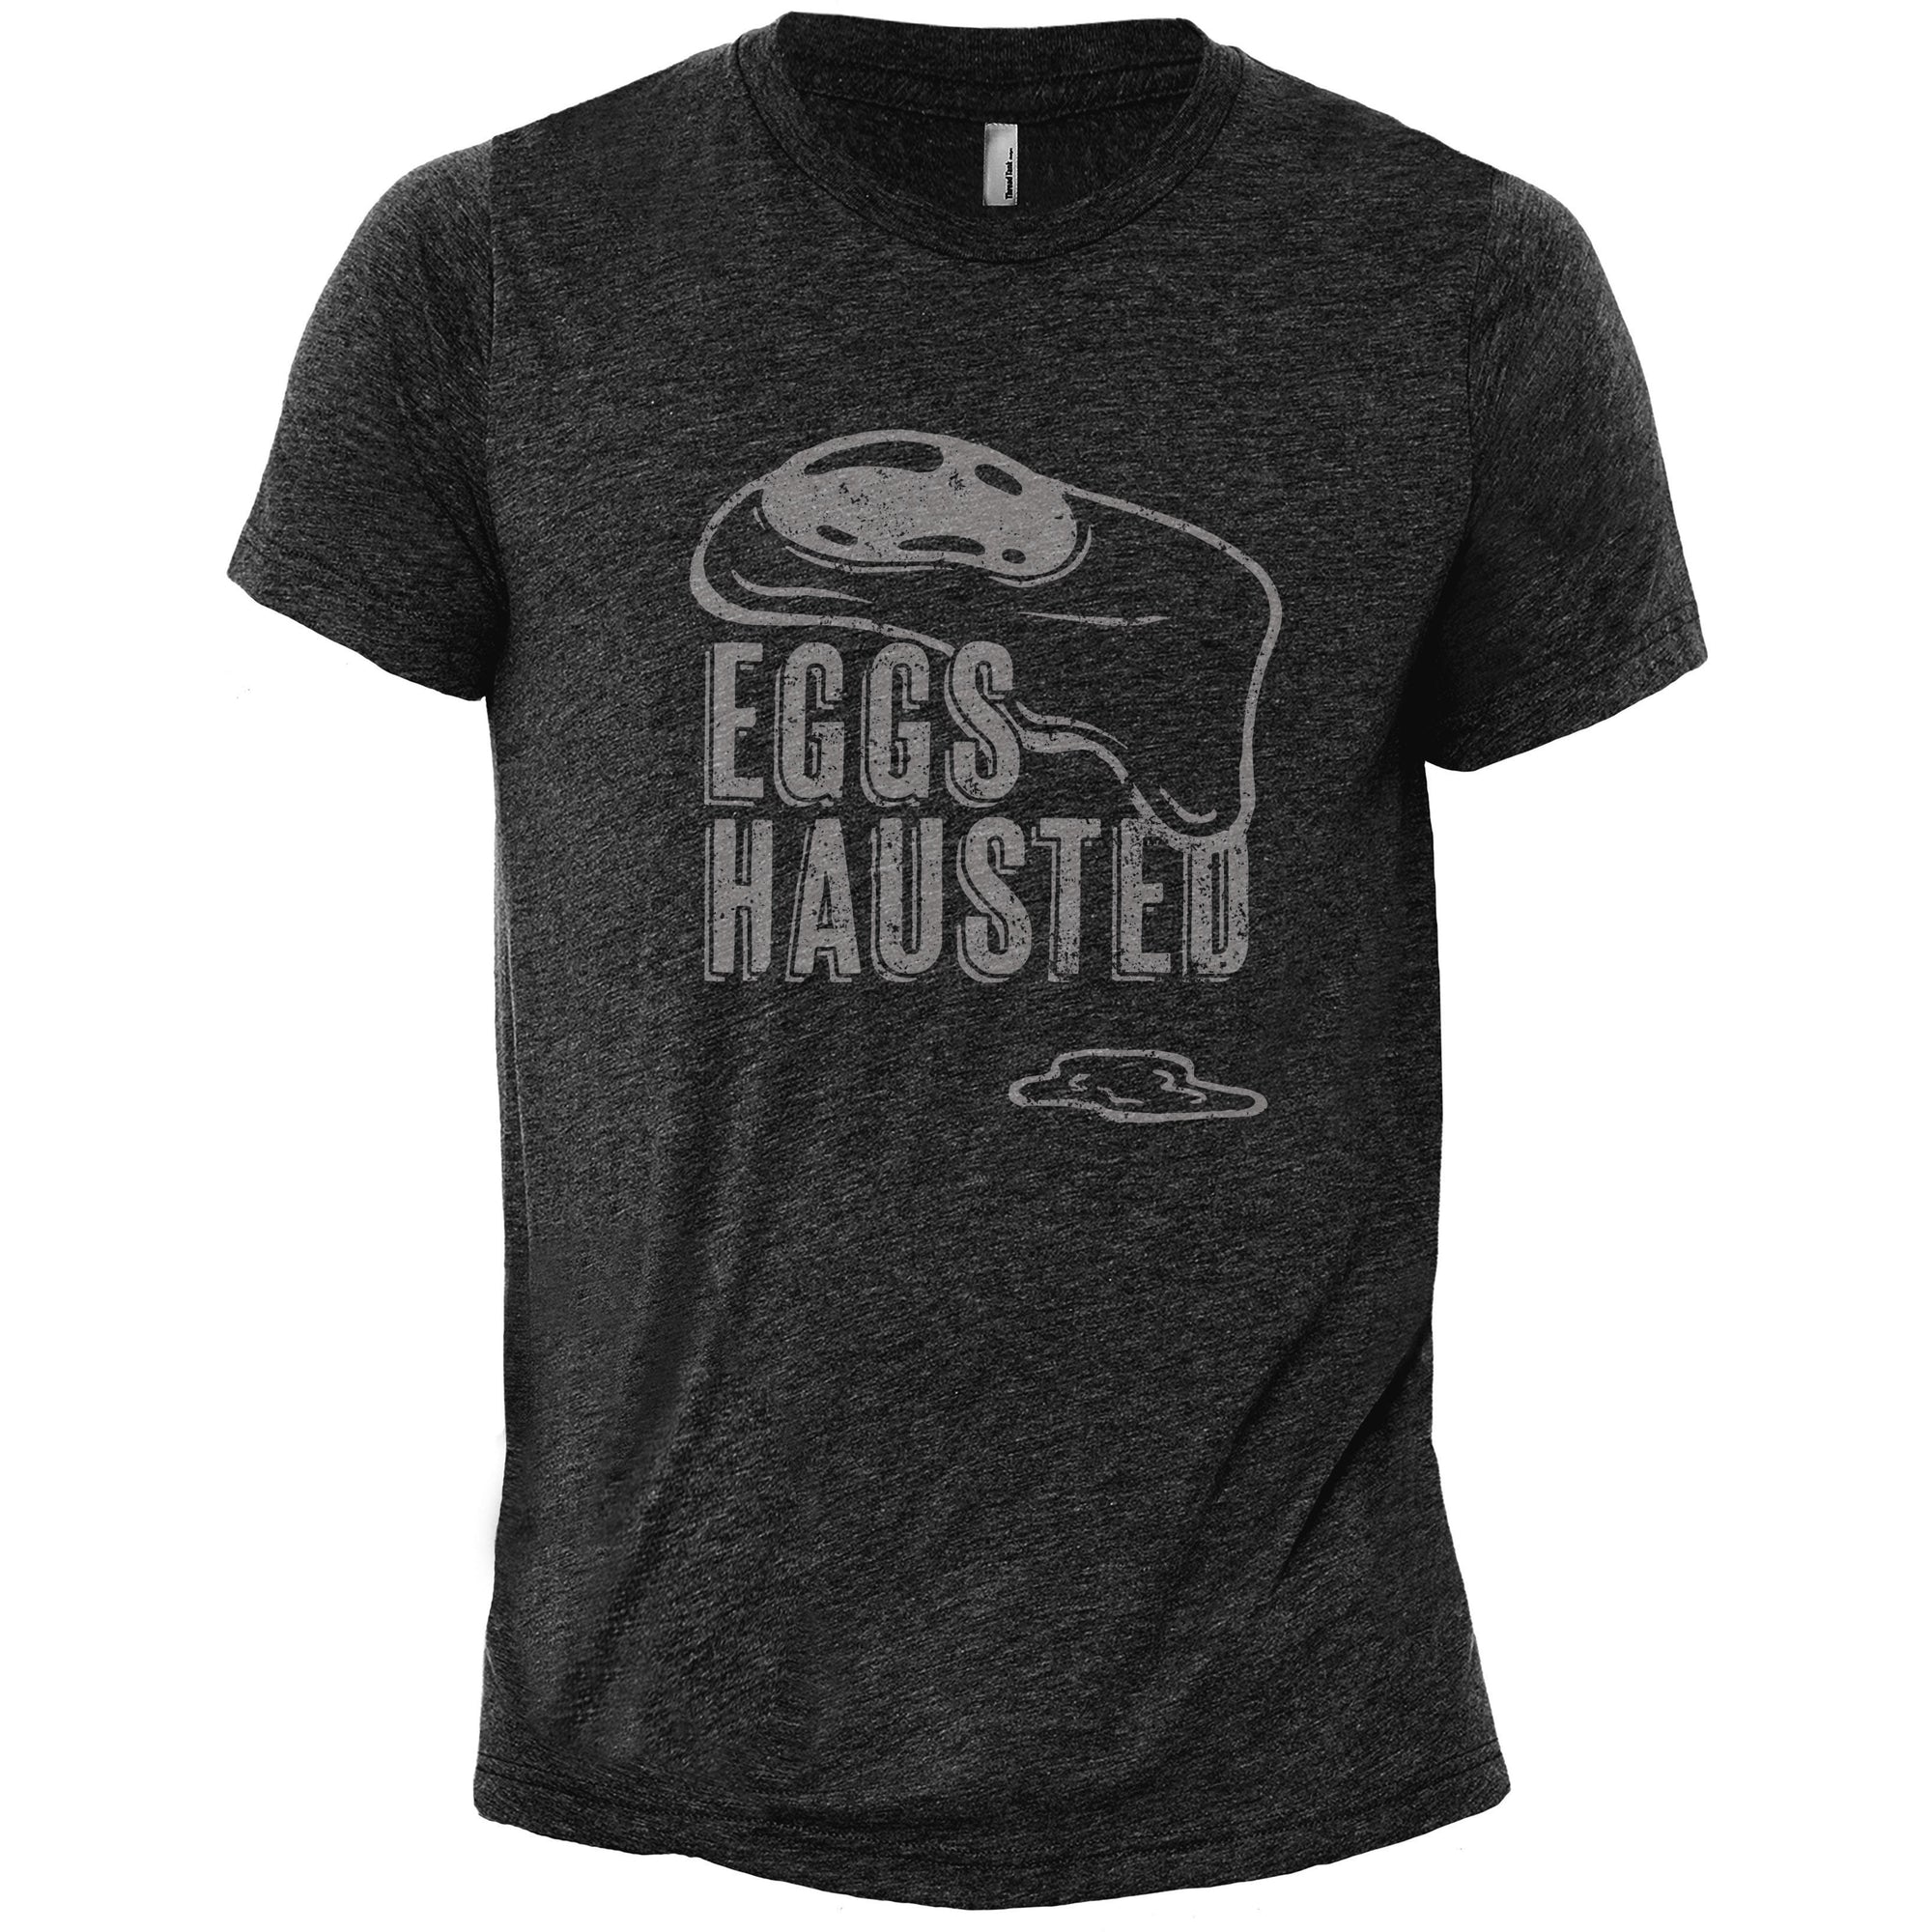 Eggshausted - thread tank | Stories you can wear.